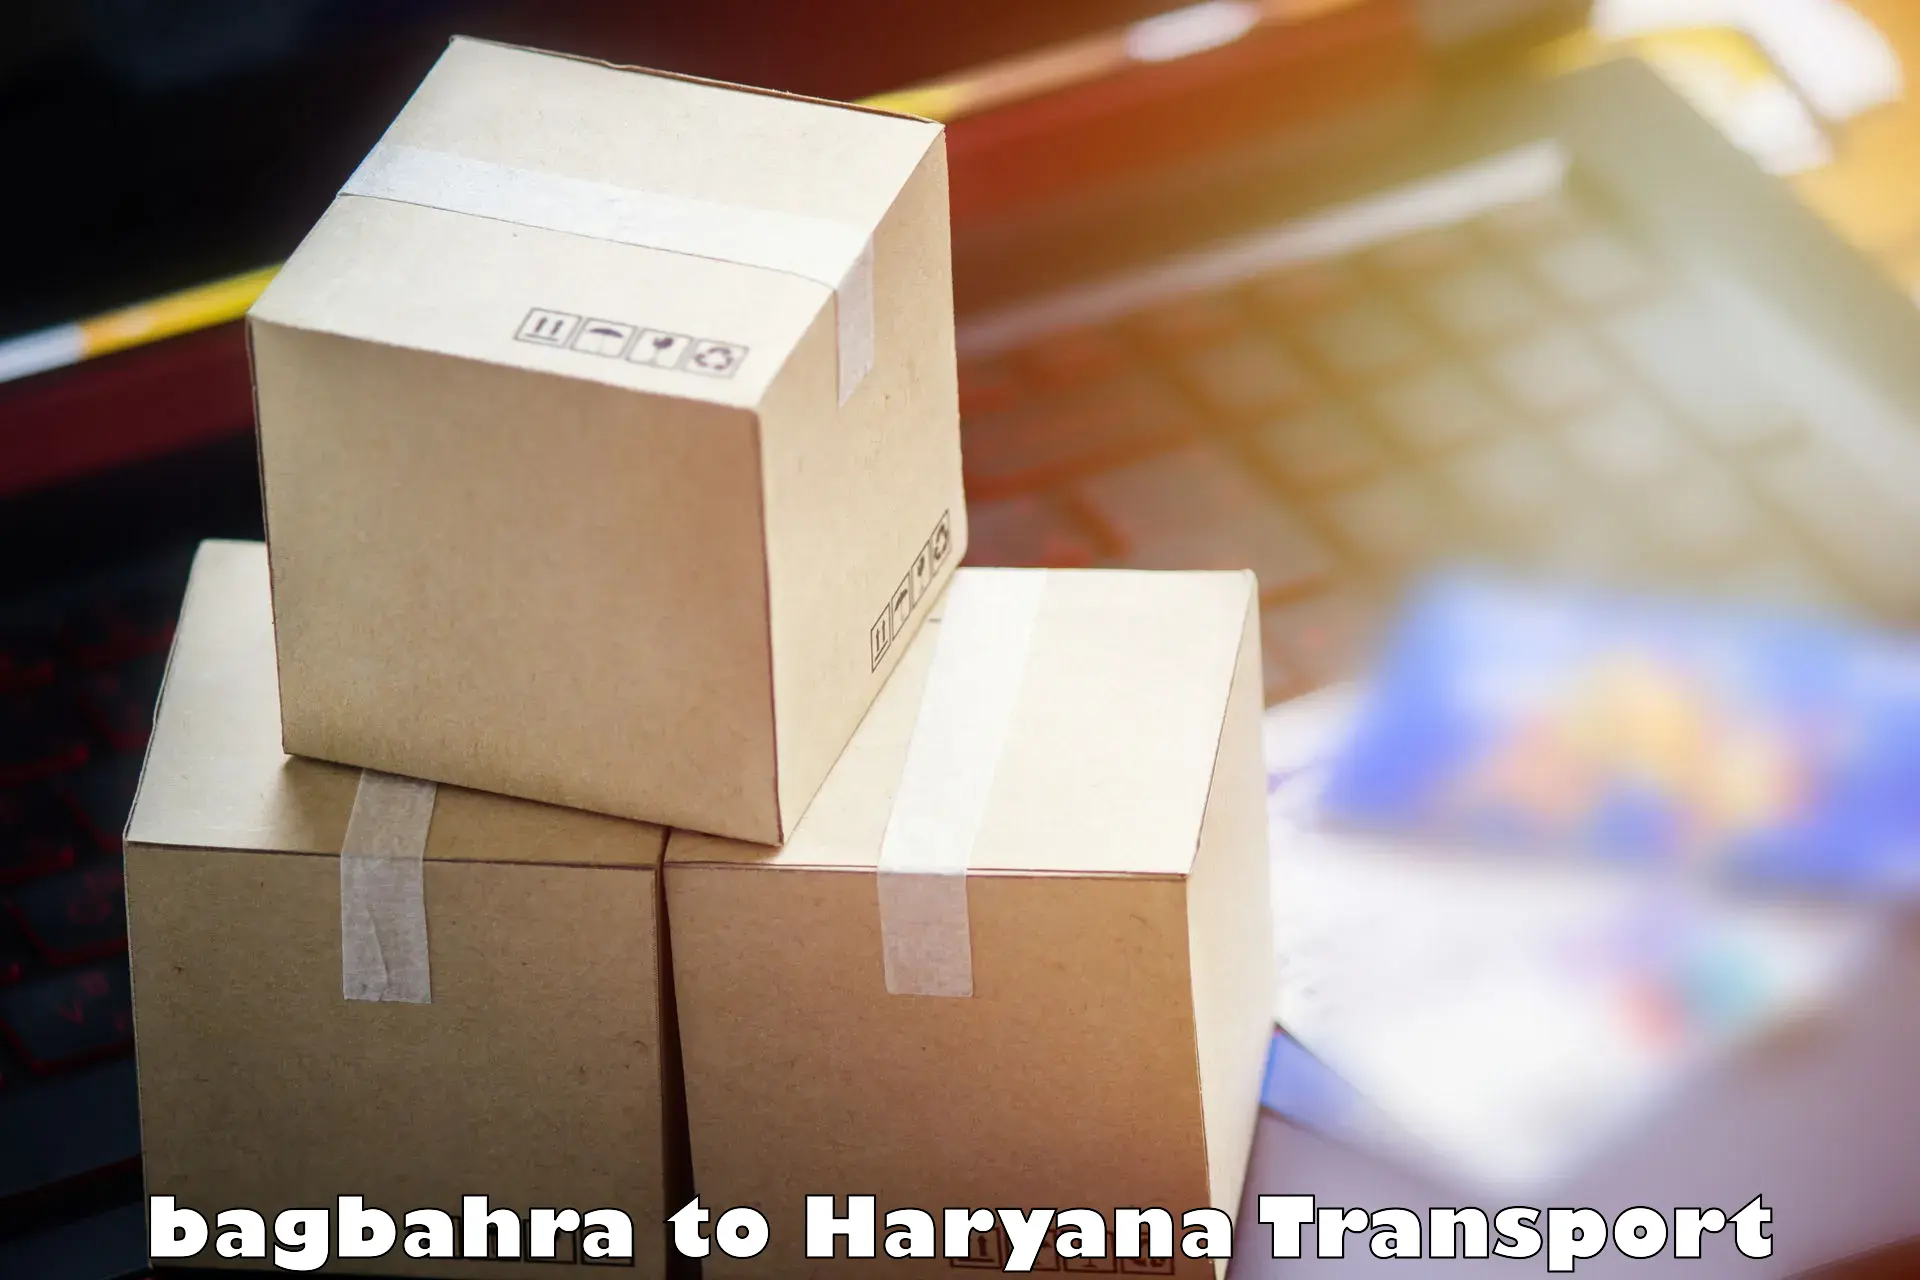 All India transport service bagbahra to Gurgaon